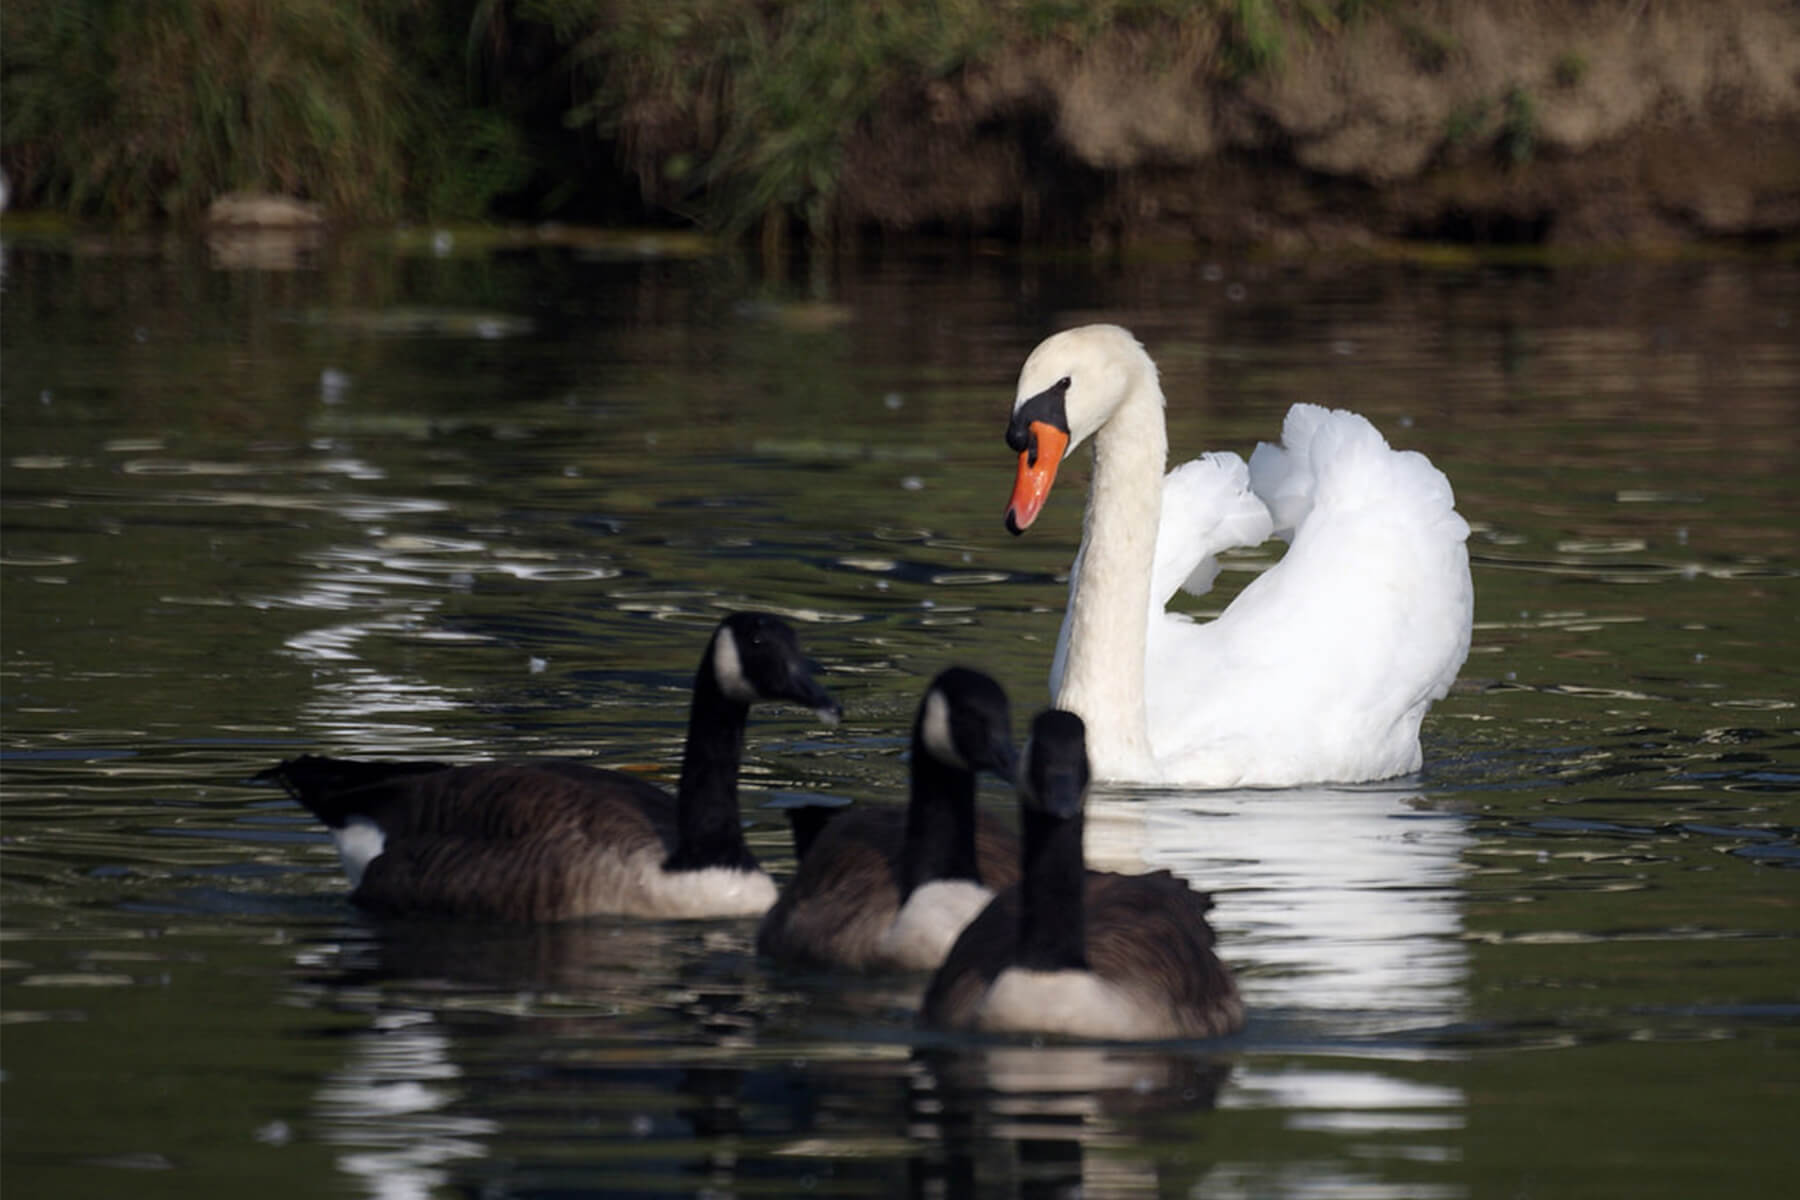 Mute swan in the same pond as native ducks.